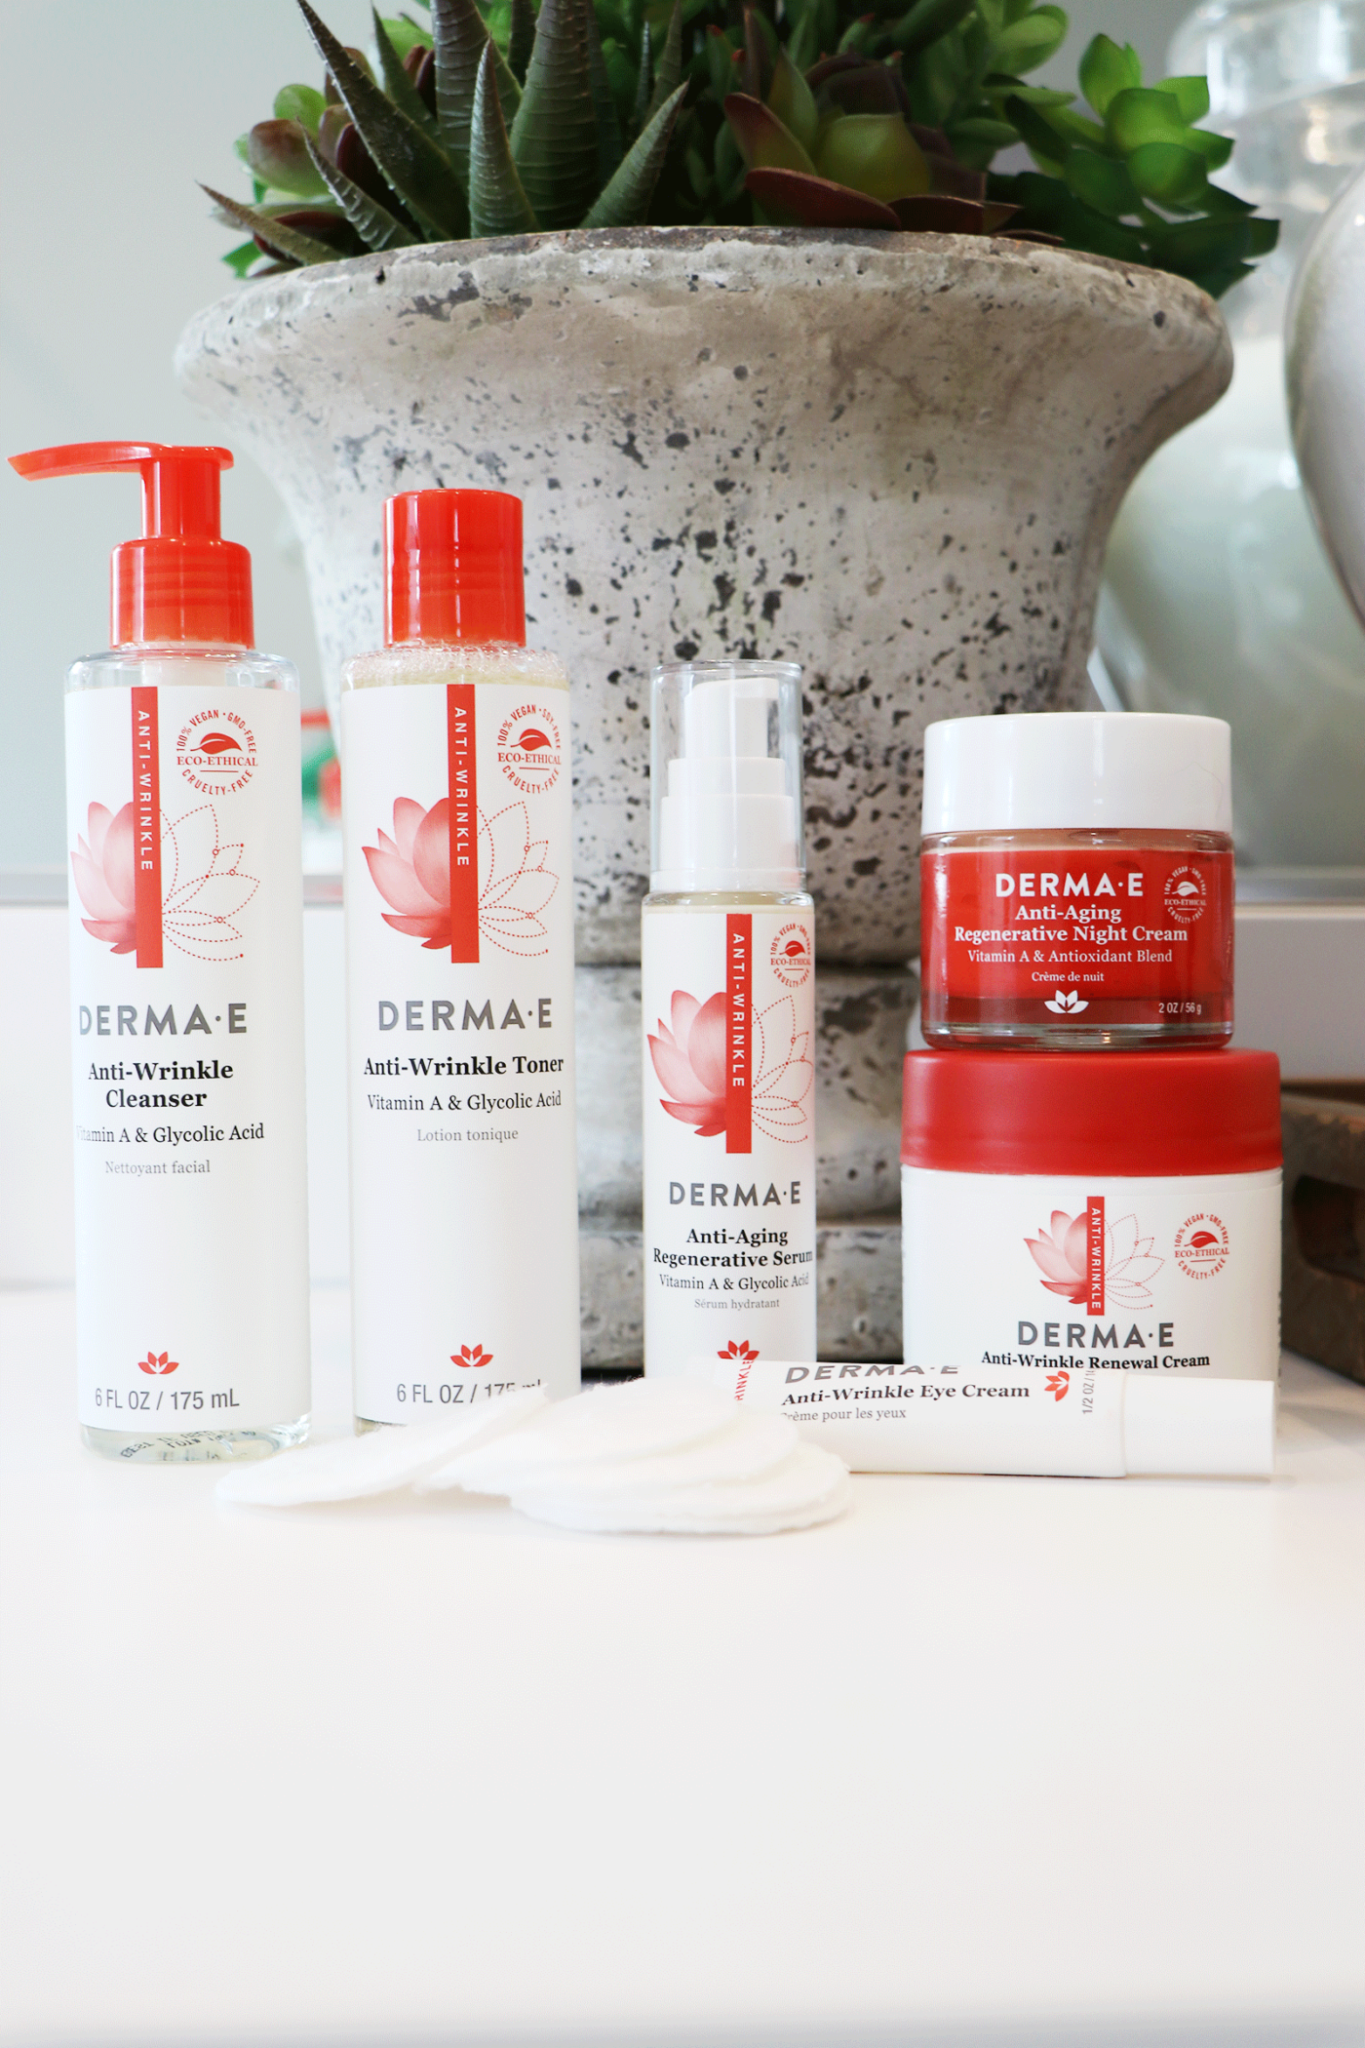 When it comes to skincare, looking young is something we all strive for. But at what cost? If you are looking for an affordable anti-aging routine I have you covered! Click to see why this affordable anti-aging line is amazing.